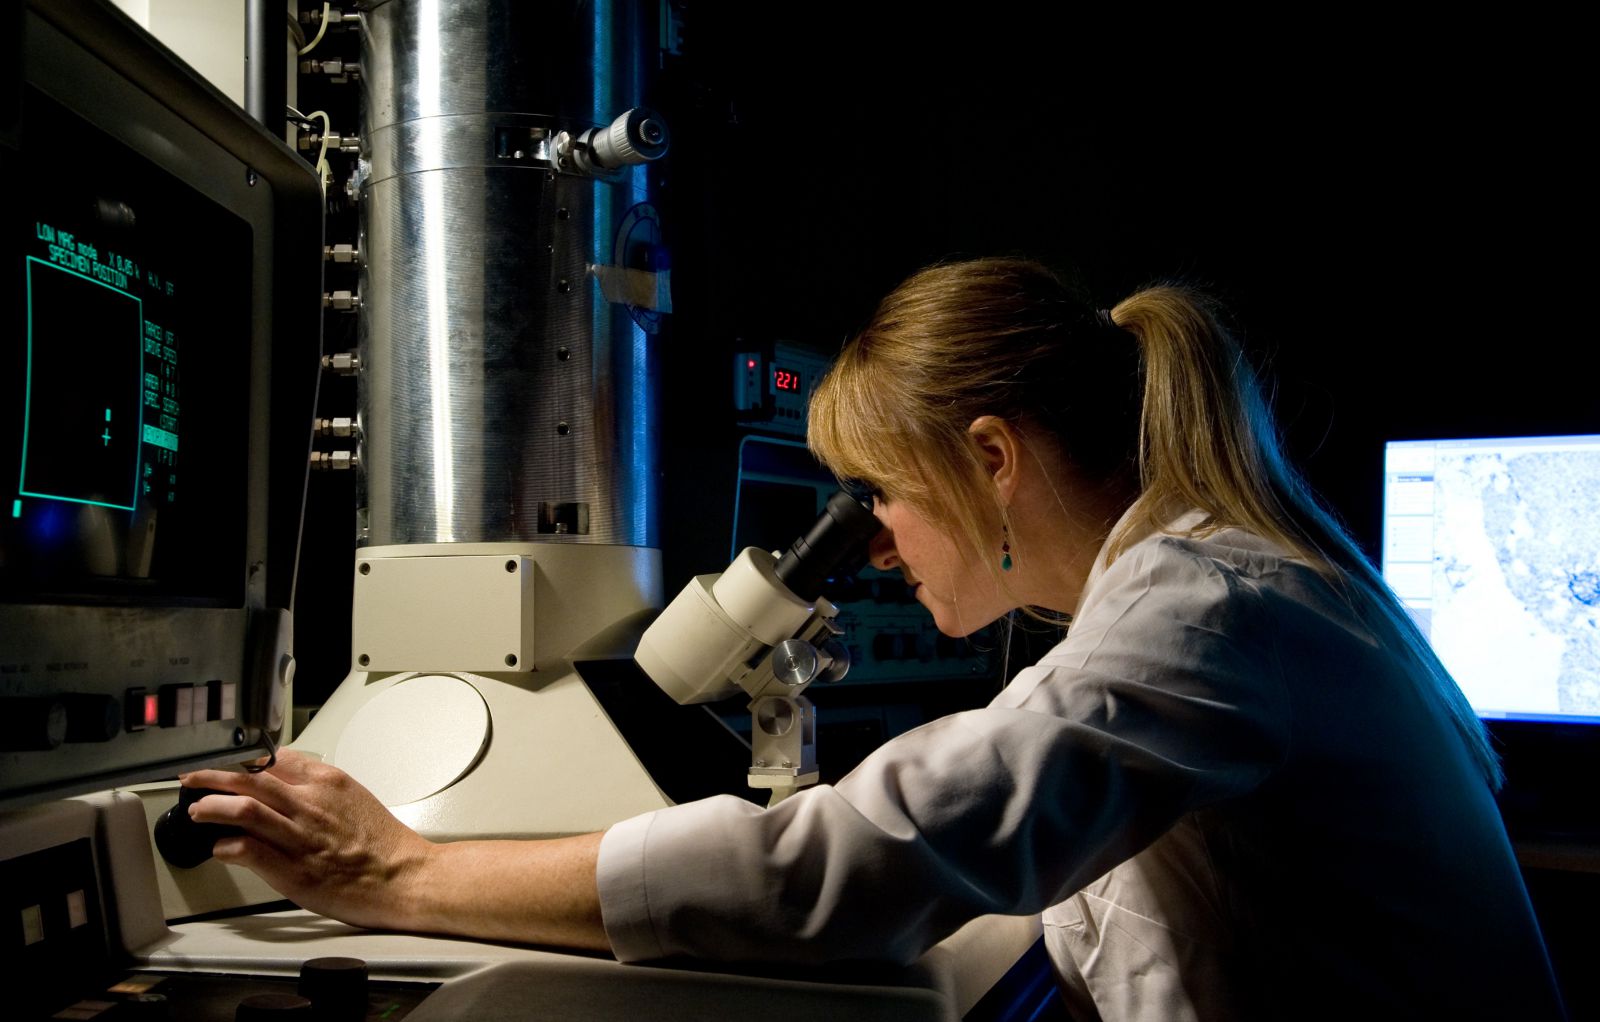 PhD student looks through a microscope in a science lab at the ɫ